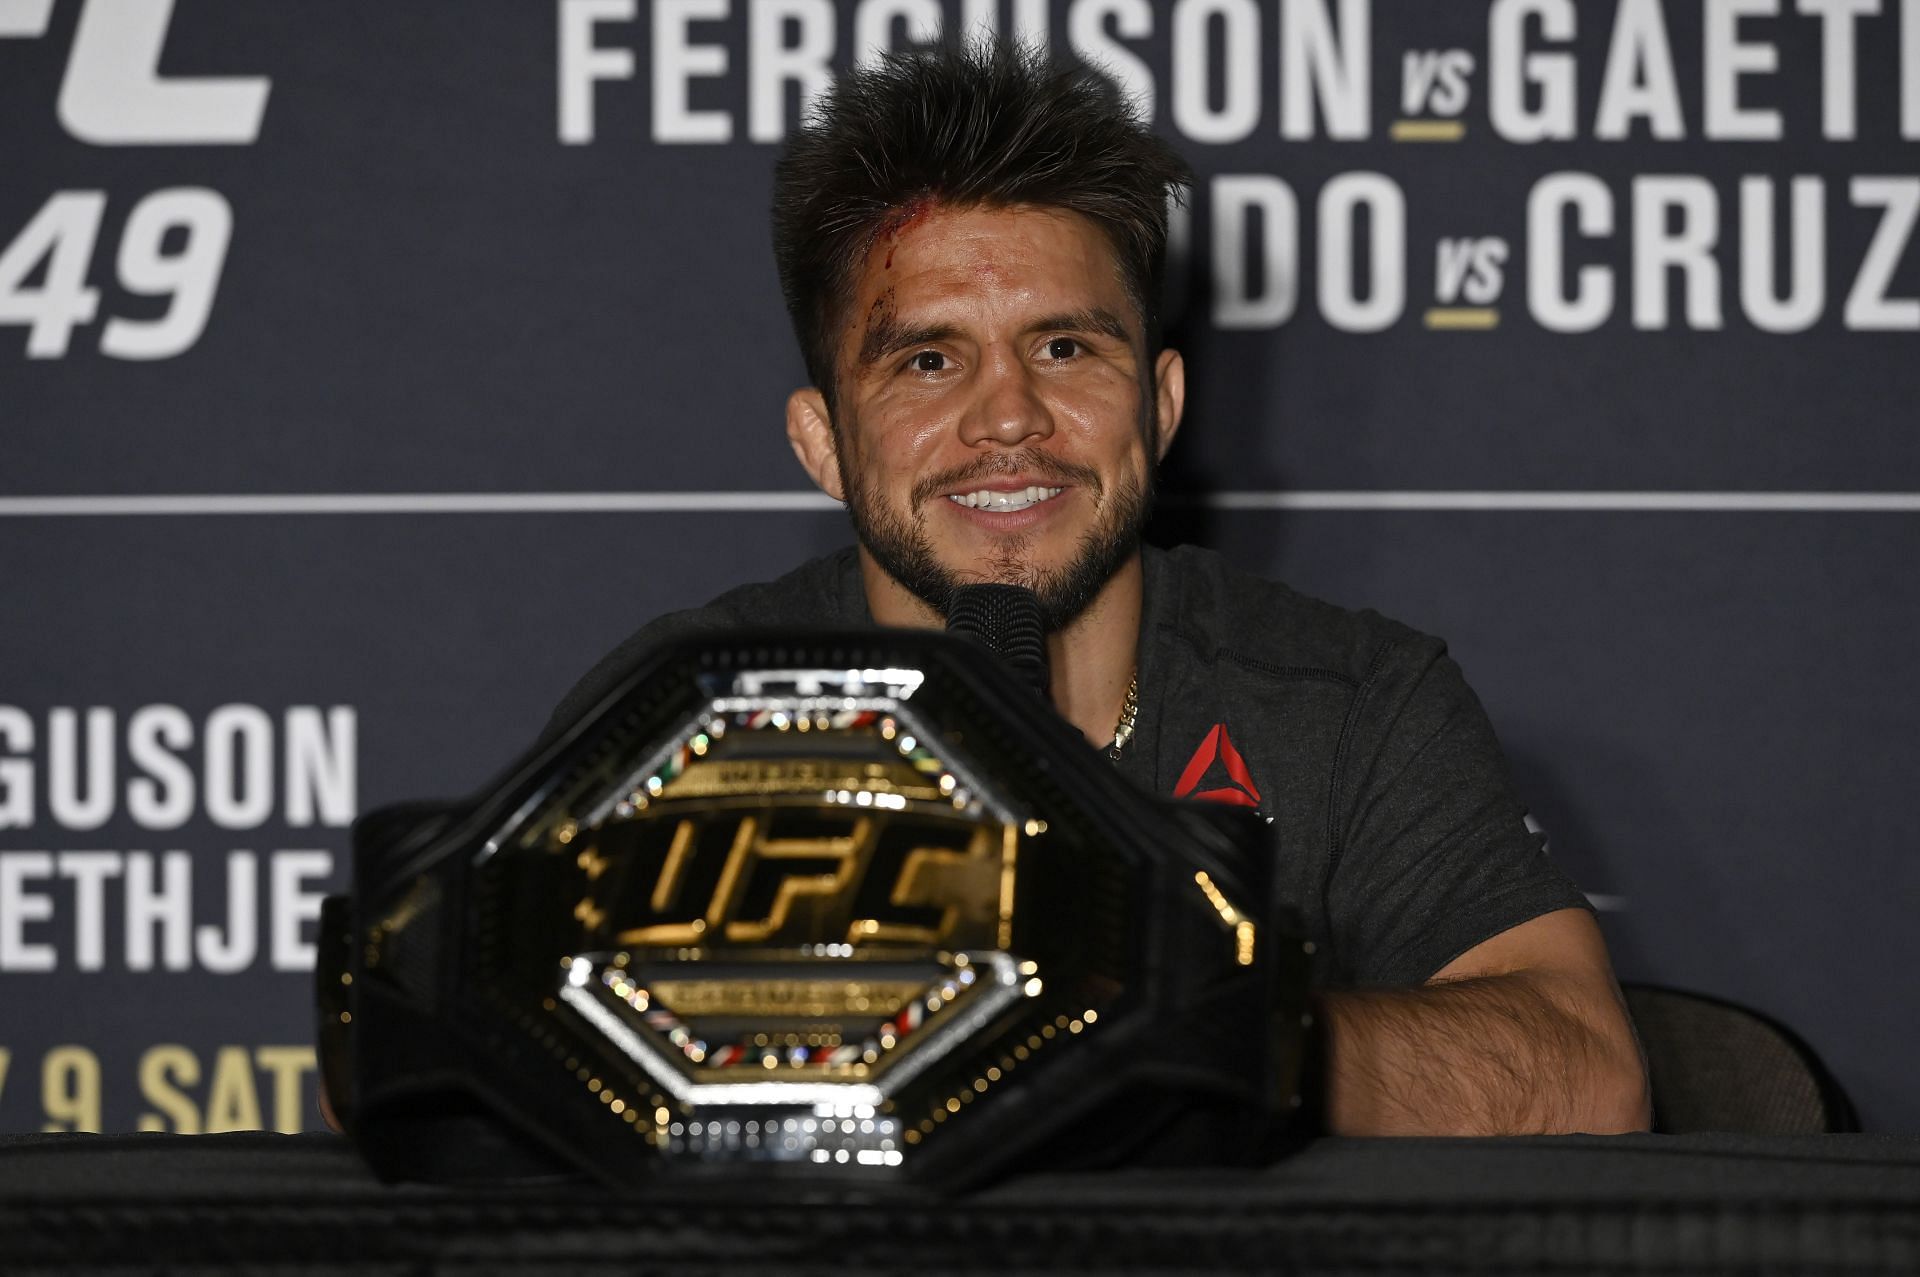 Henry Cejudo walked away from the octagon before losing one of his titles